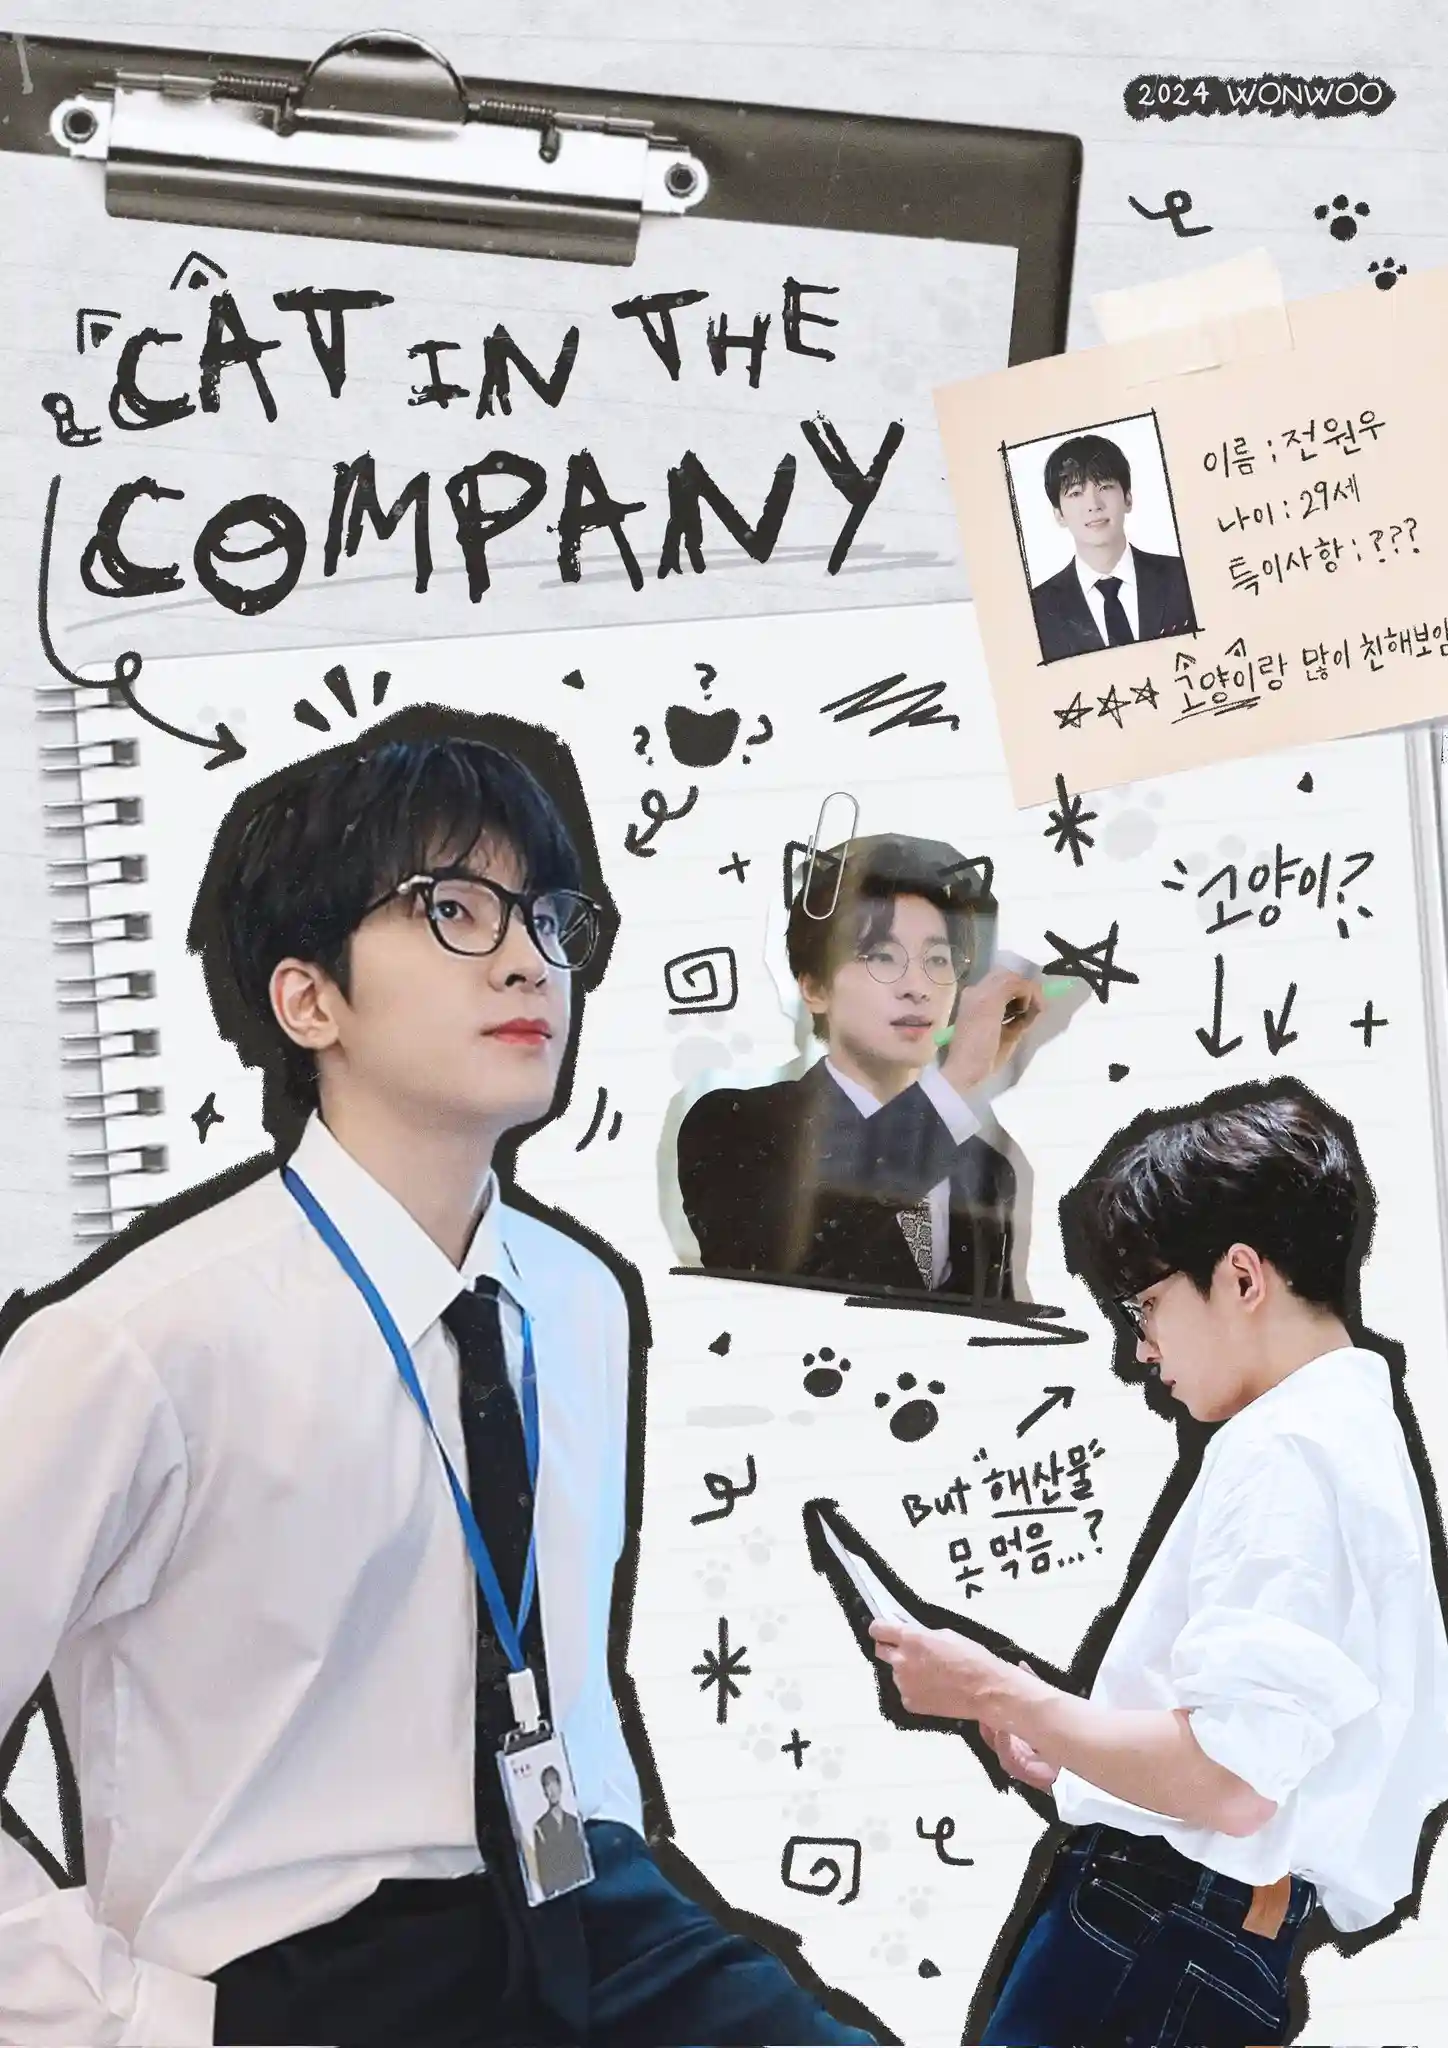 CAT IN THE COMPANY